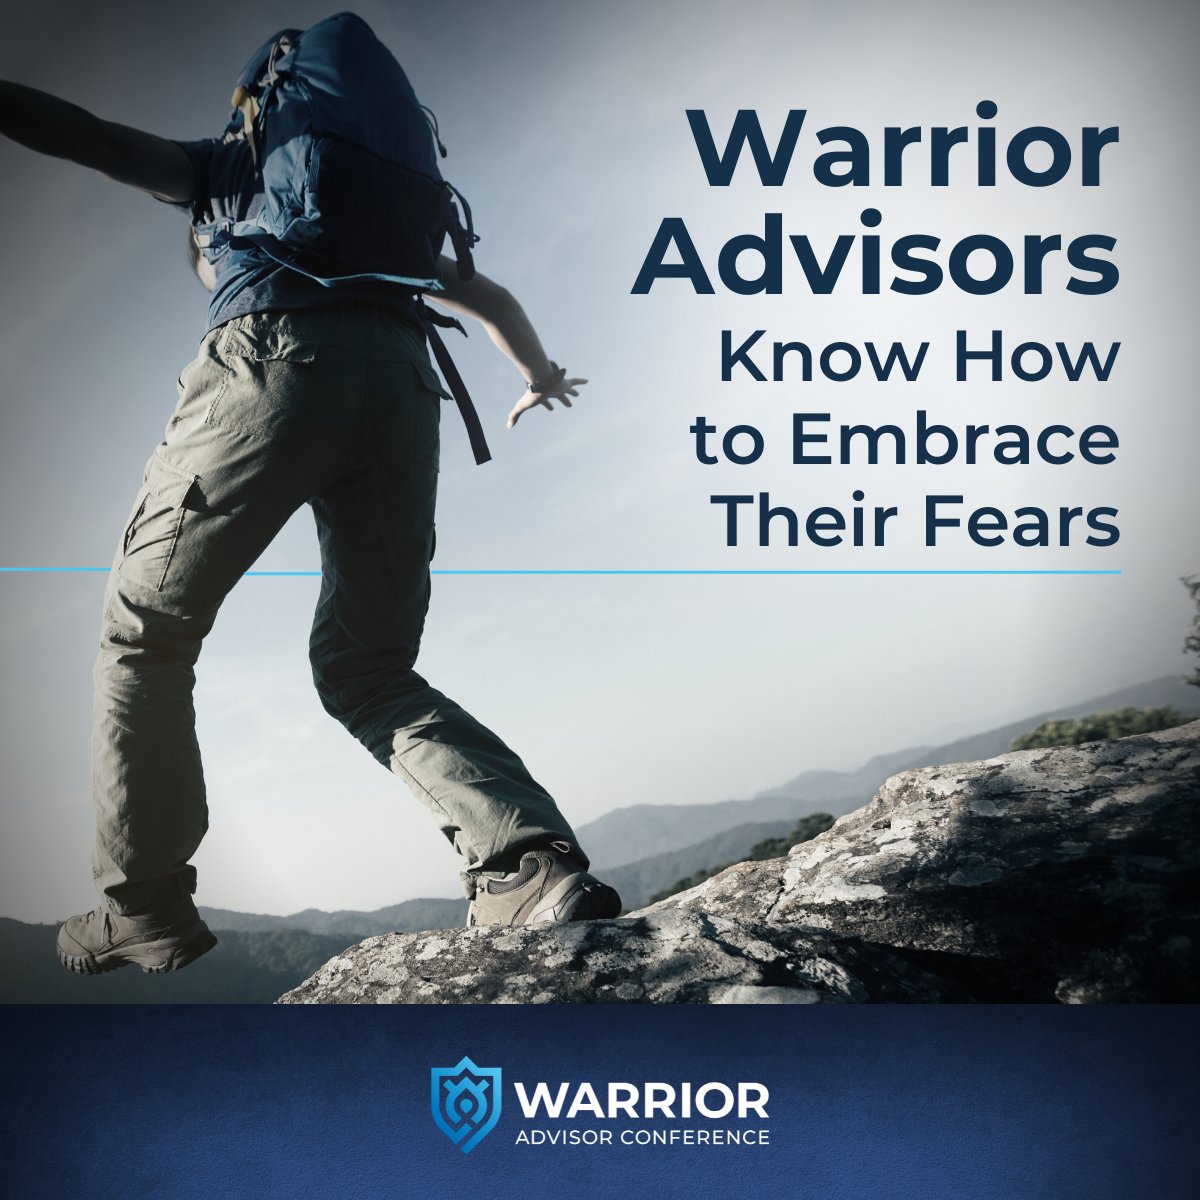 Today, let’s shake our fears. @Dom Raso’s challenge for #WarriorAdvisors: List your top 3 fears, and: Why you fear them How they’re limiting you Let’s embrace them together! WarriorAdvisorConfrence.com #SeekBattle #CrushIt #RFGWC22 #FinServ